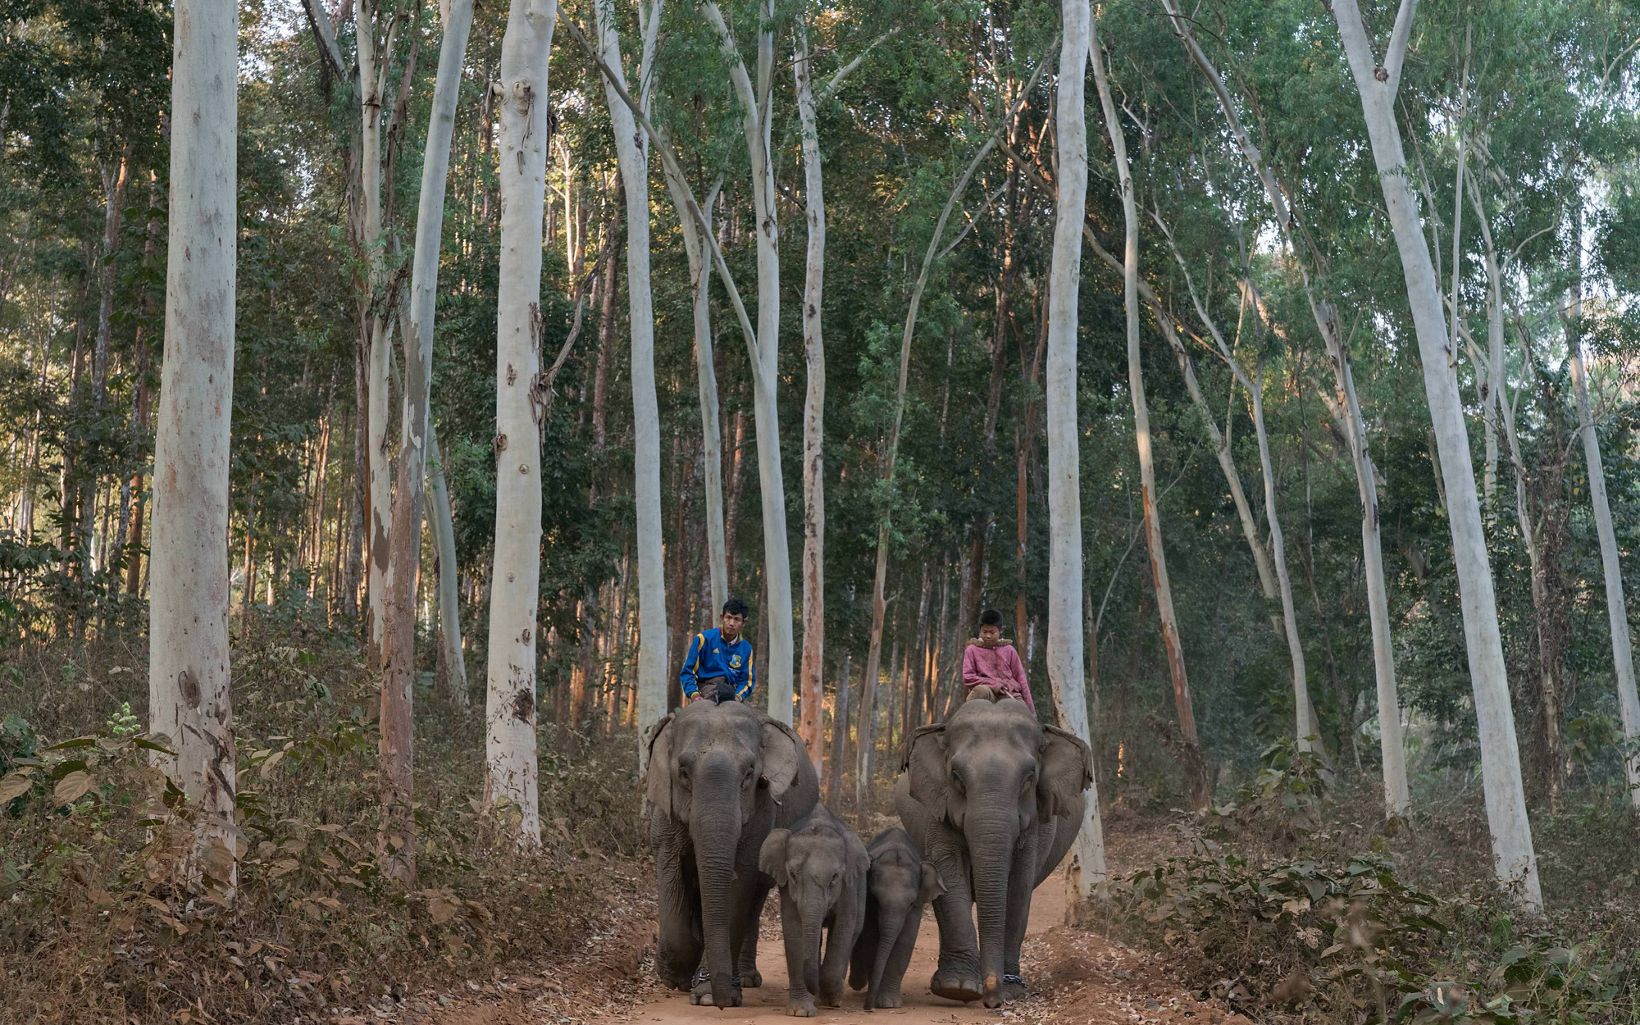 
                
                  Nat Pauk Elephant Village where tourists in Myanmar can come to observe elephants that were once used in these hardwood forests to drag out cut timber.
                  © Michael Yamashita
                
              